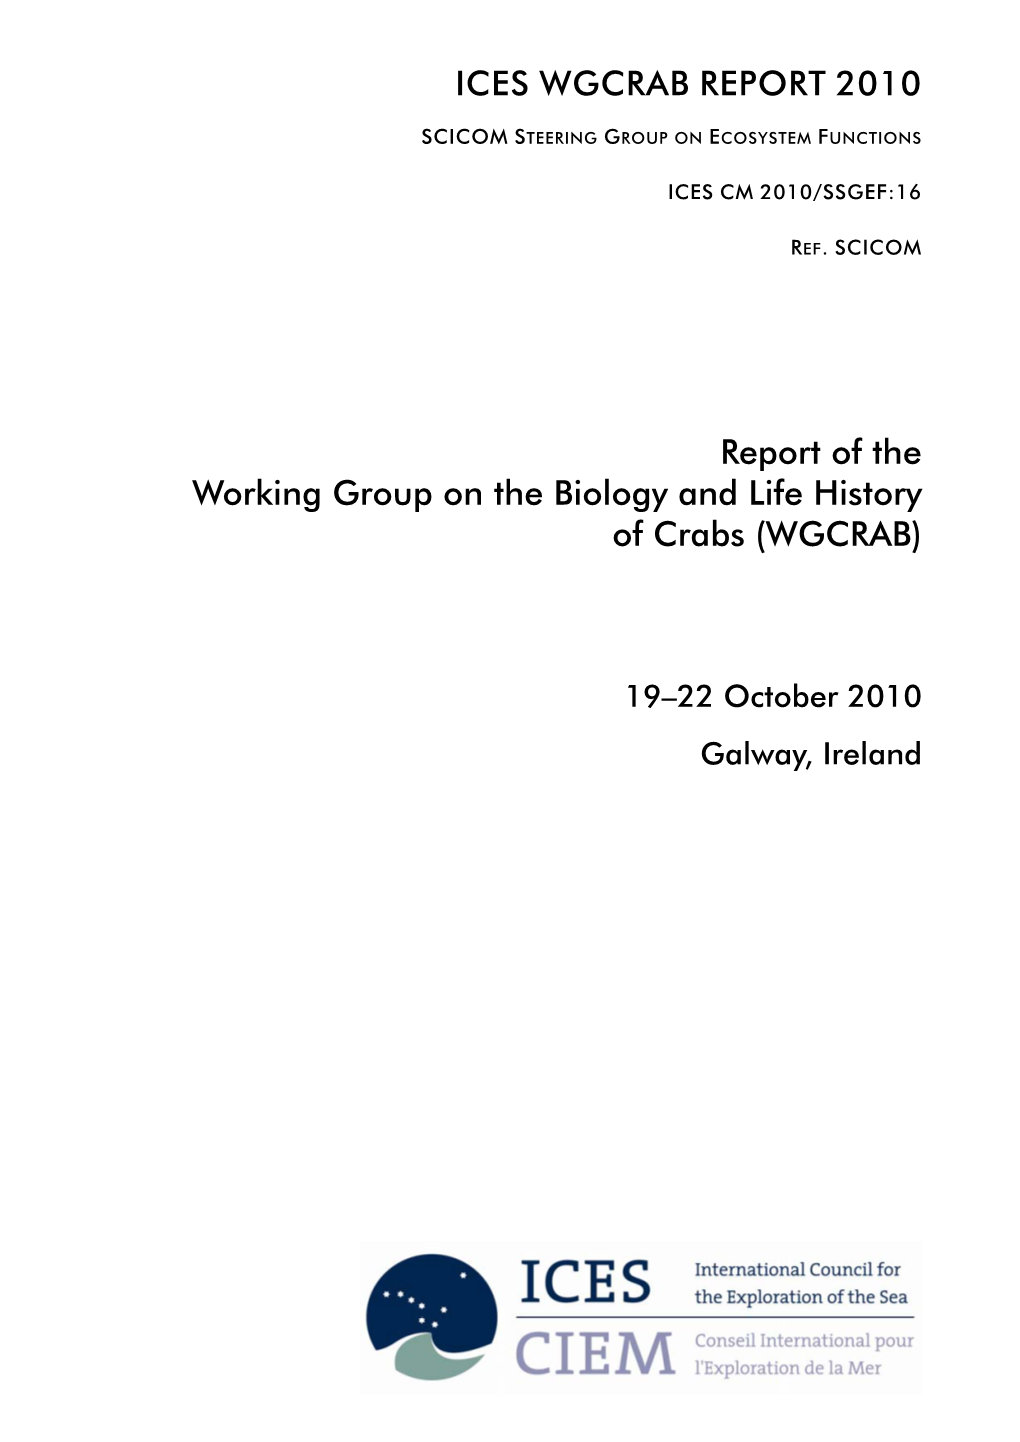 Report of the Working Group on the Biology and Life History of Crabs (WGCRAB)